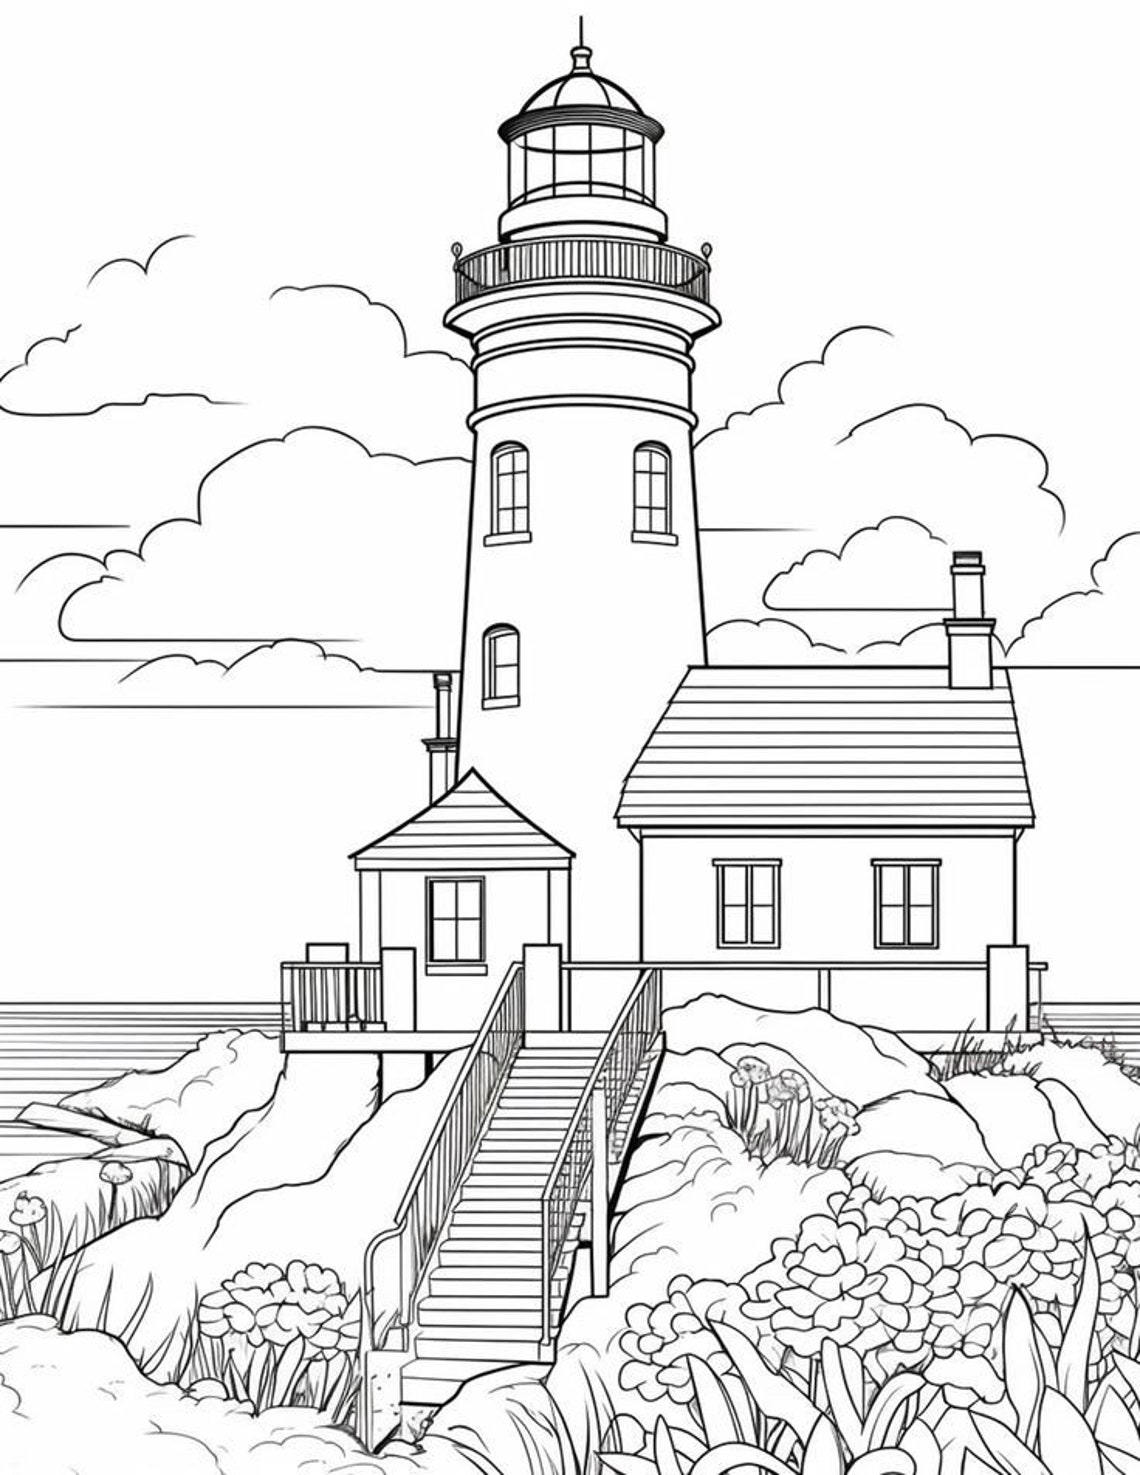 5 House With 22 Lighthouse Colouring Pages for Kids and Adults - Etsy